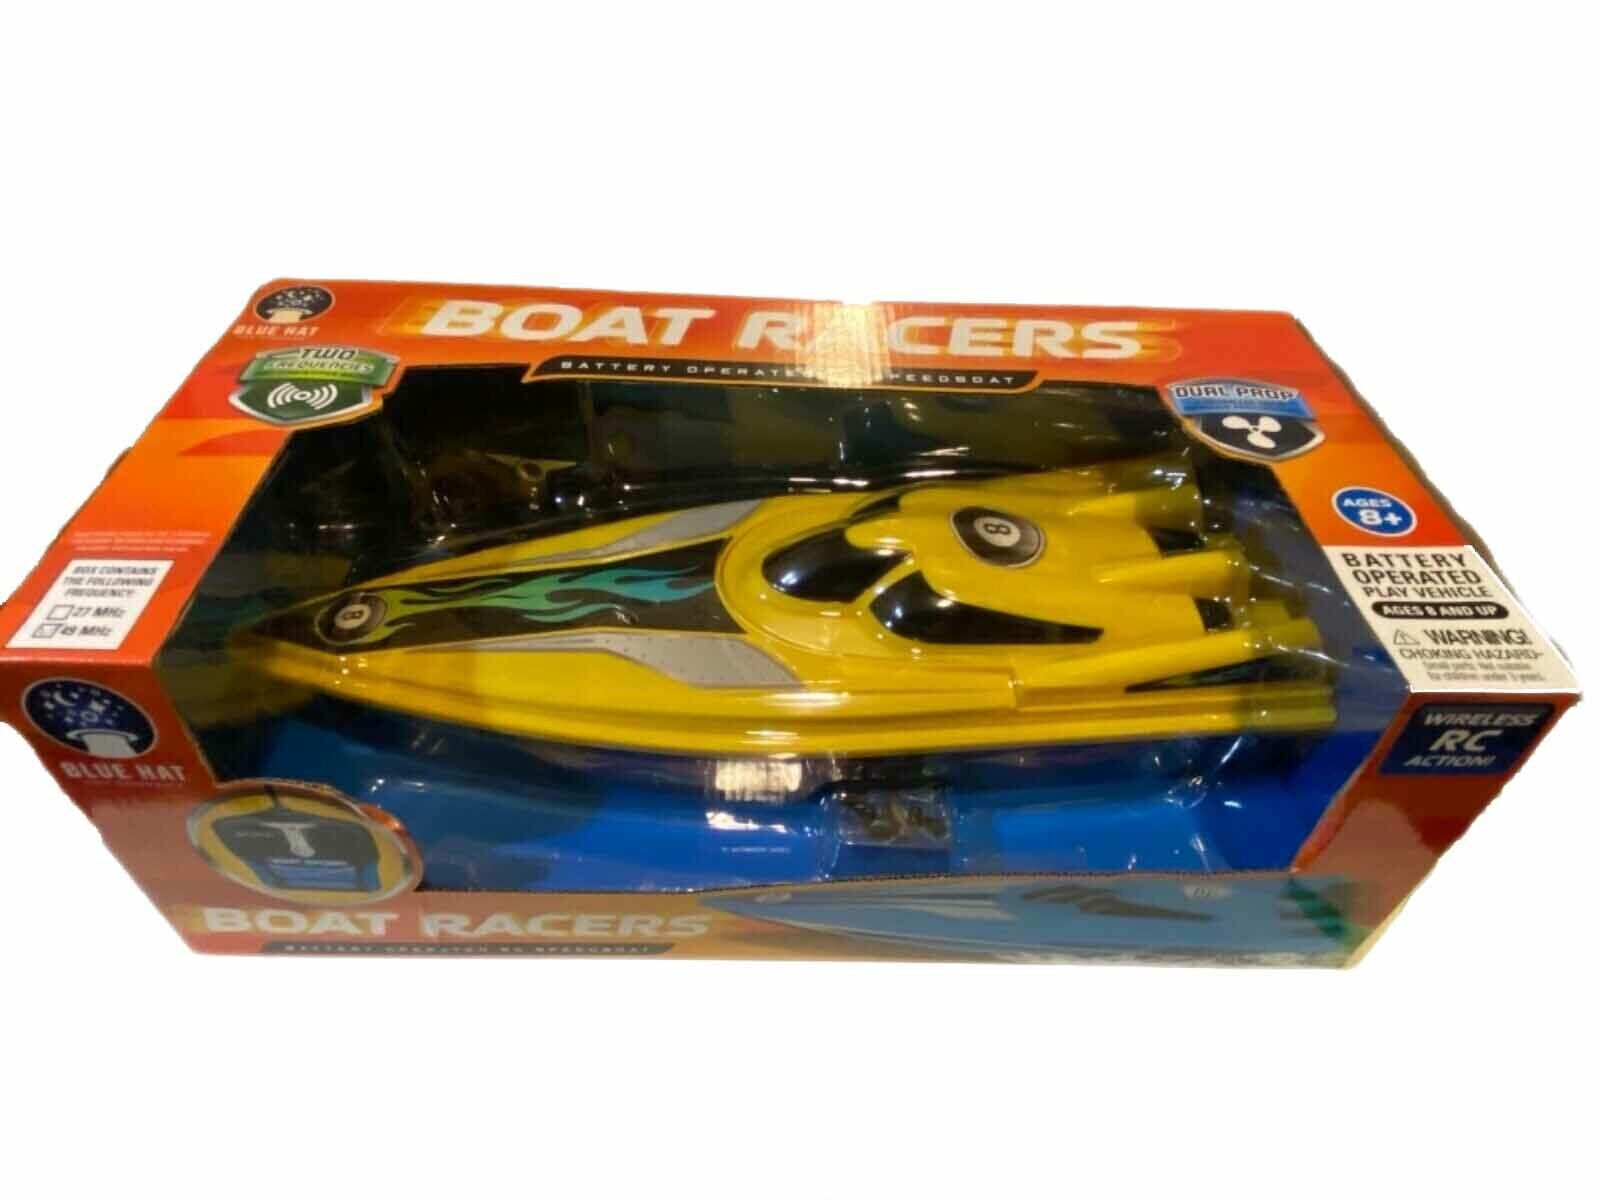 Boat Racers Battery Operated Remote Control Speedboat 49 MHz Battery Operated 